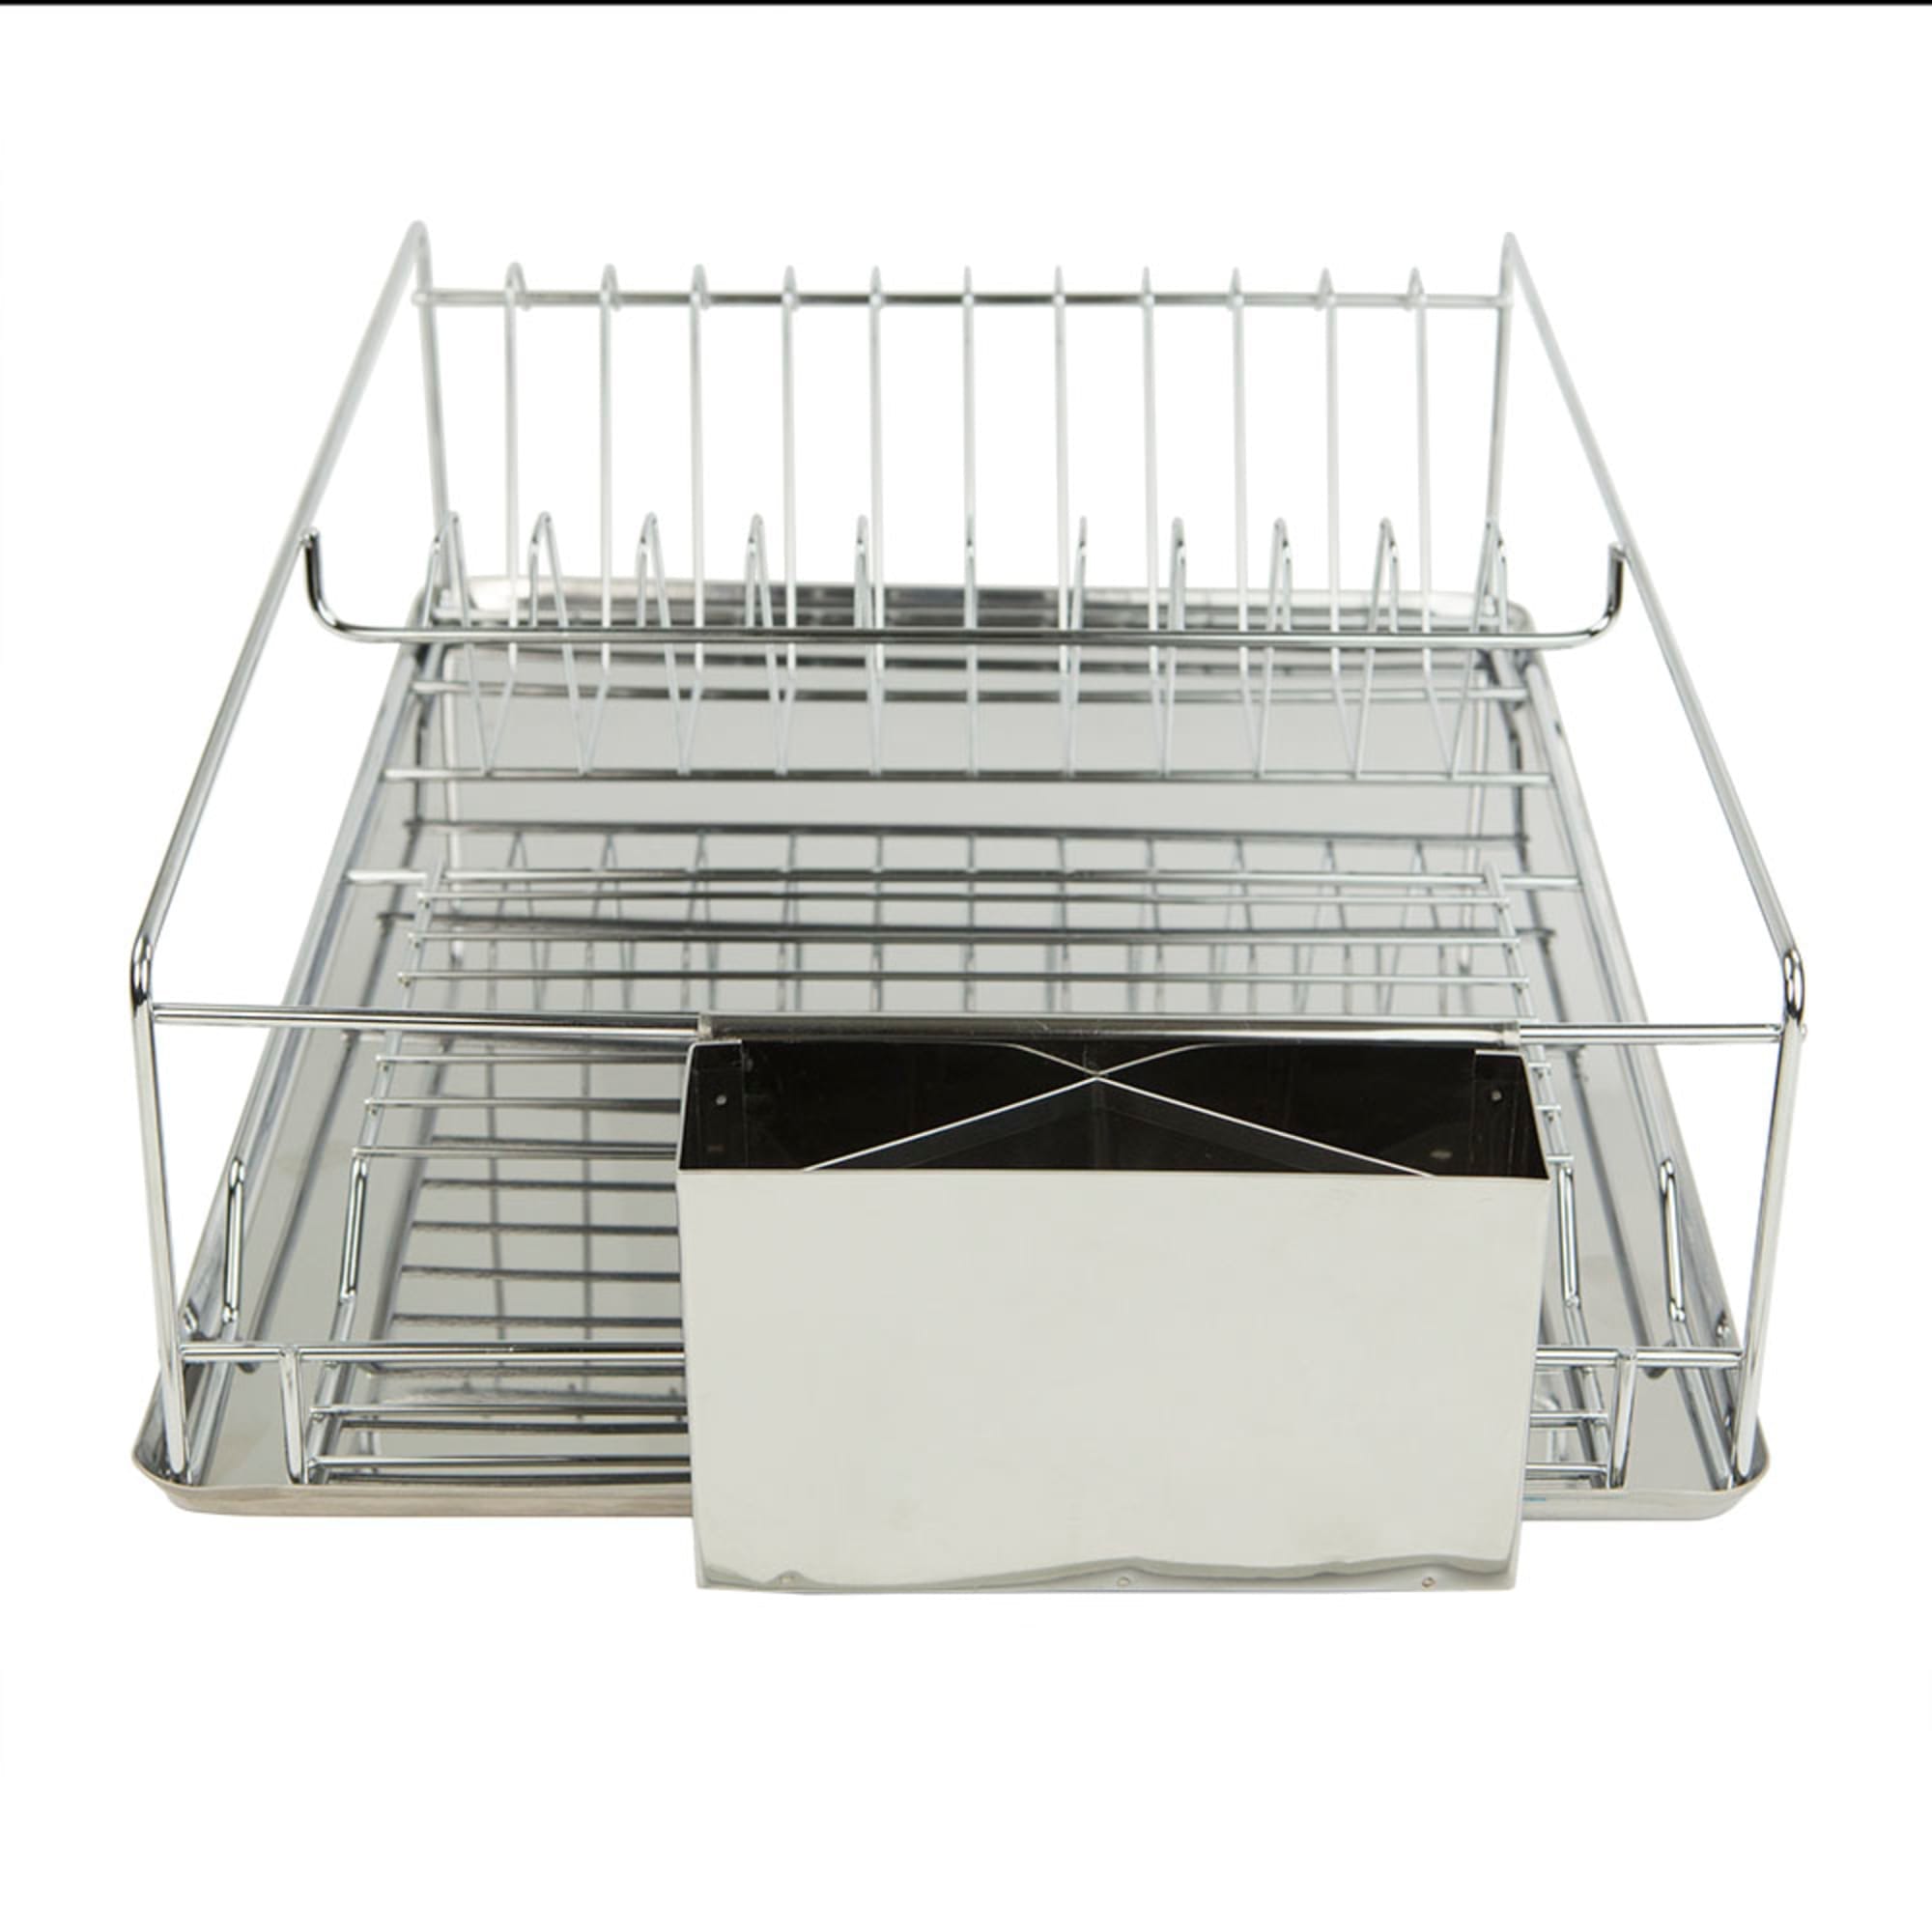 Home Basics Chrome Plated Steel Dish Rack with Tray $20.00 EACH, CASE PACK OF 6